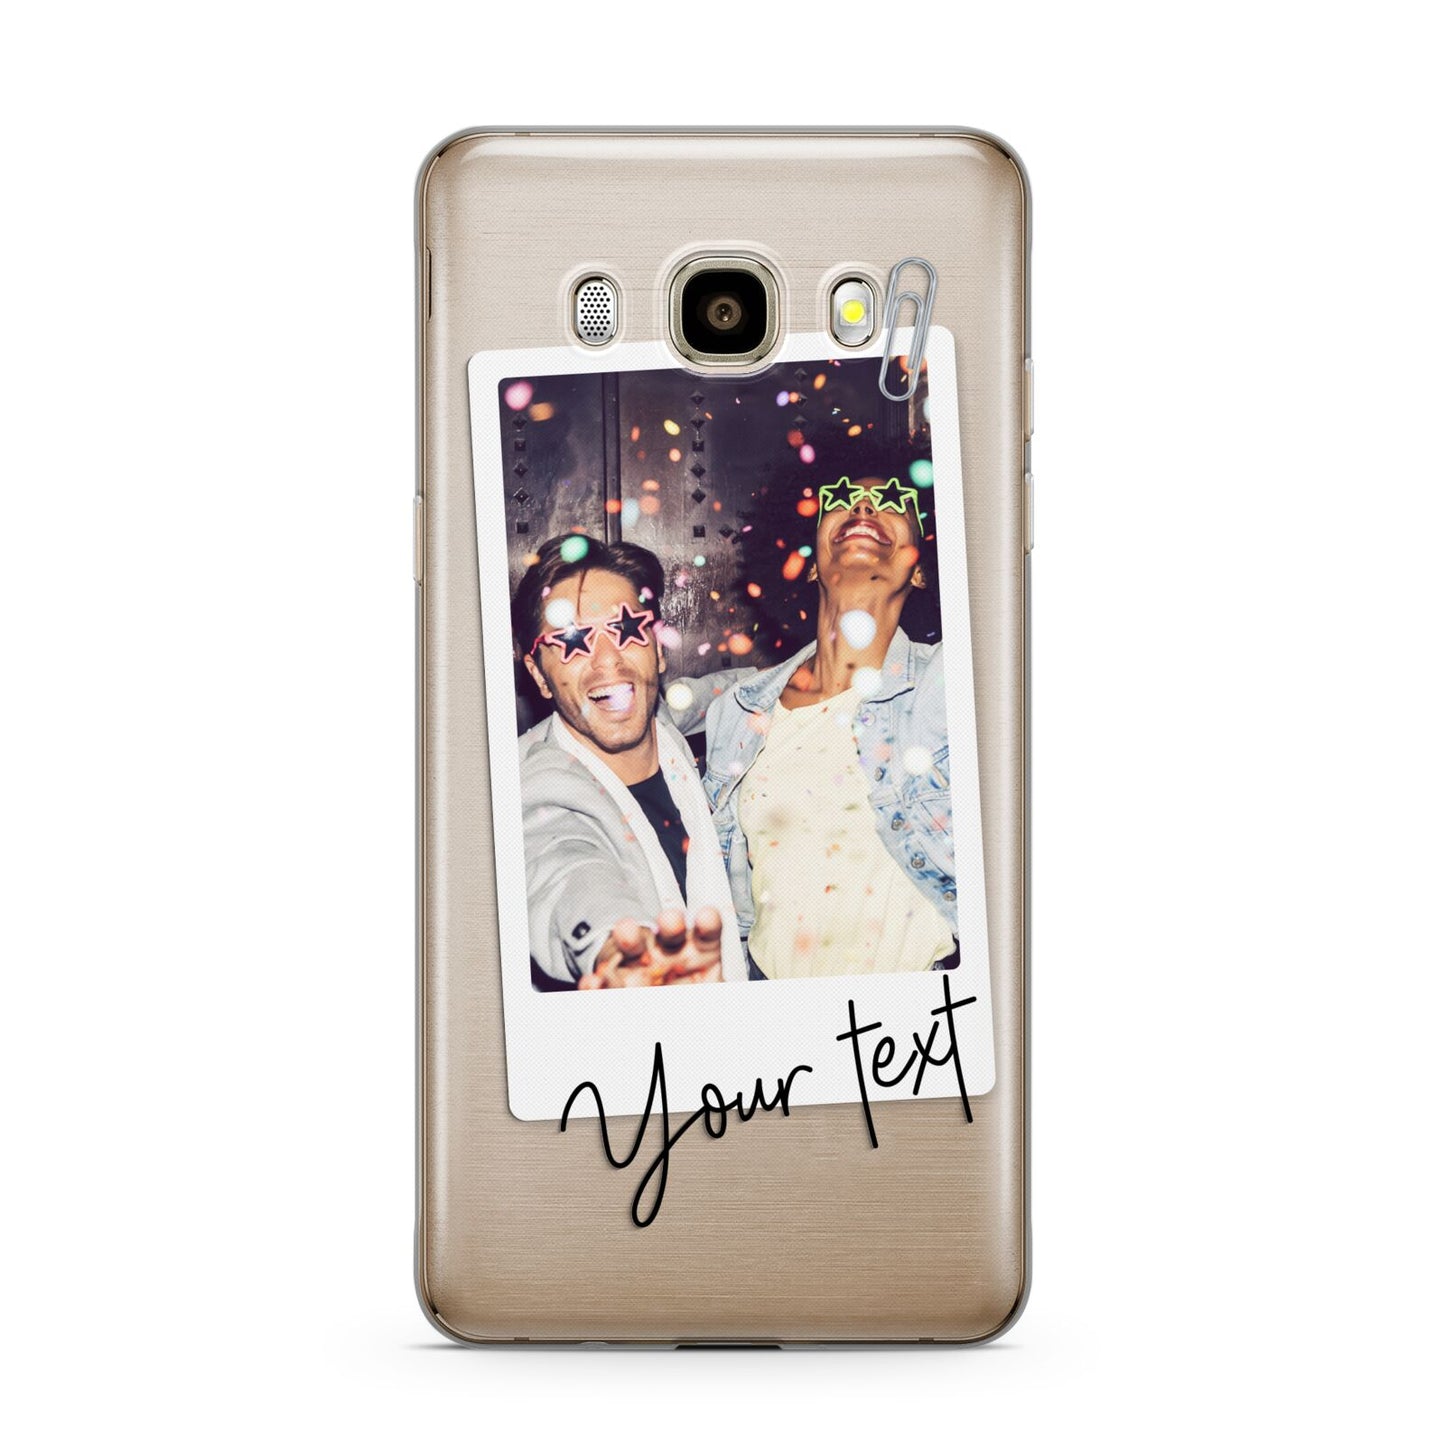 Personalised Photo with Text Samsung Galaxy J7 2016 Case on gold phone